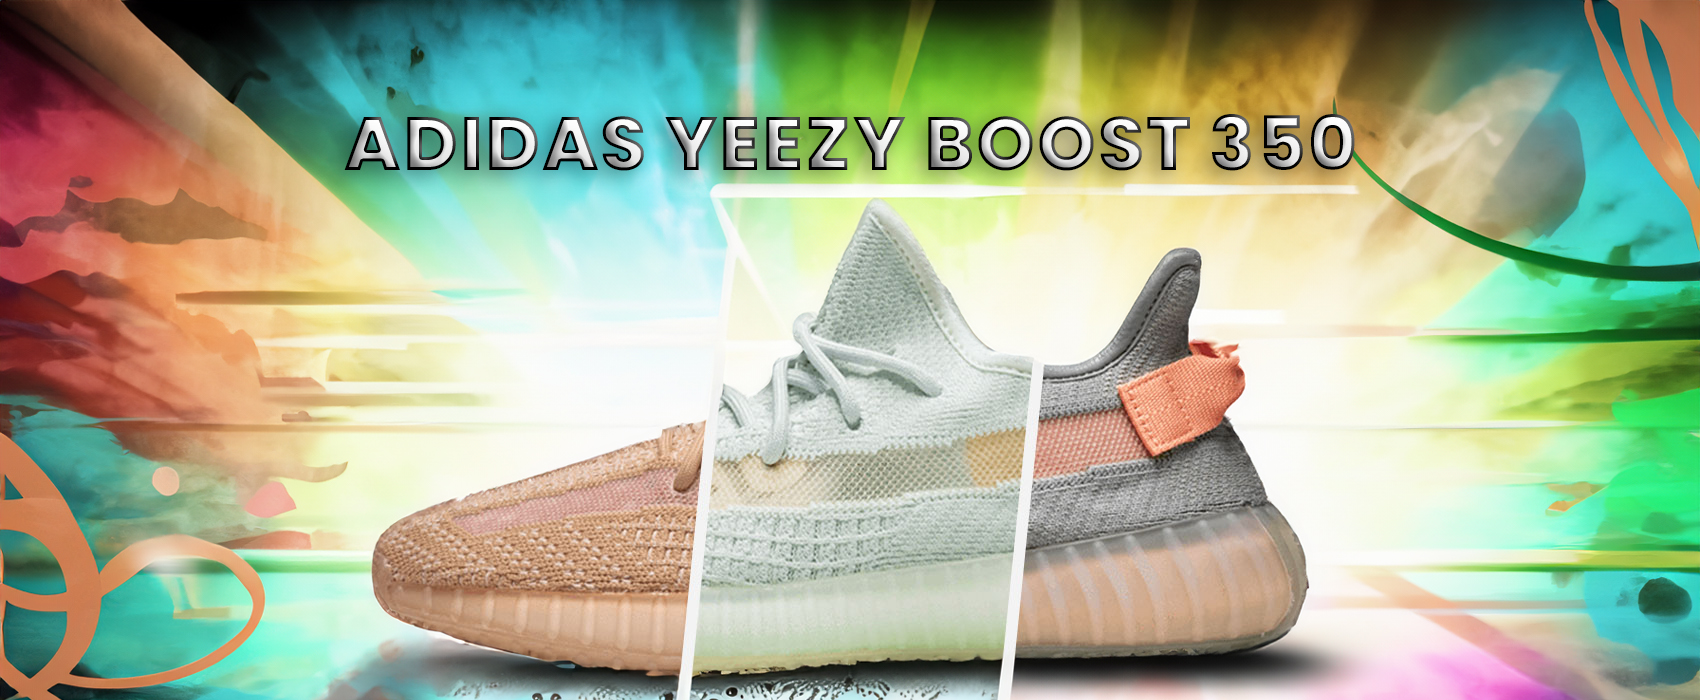 Collection de Sneakers Adidas Yeezy Boost by Kanye West